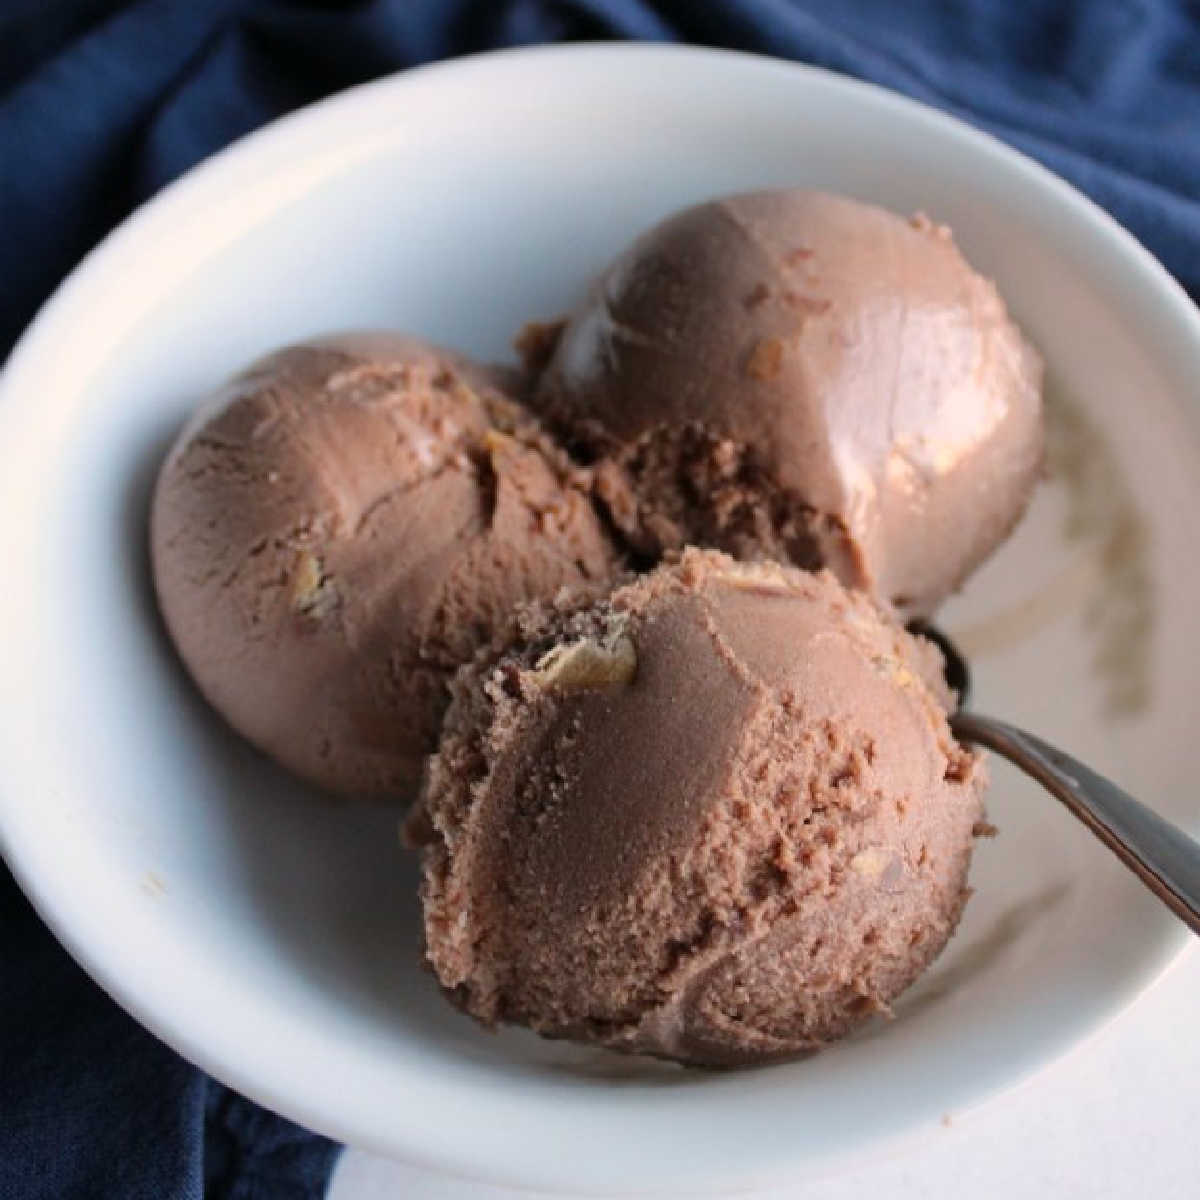 bowl of chocolate peanut butter ice cream ready to eat.